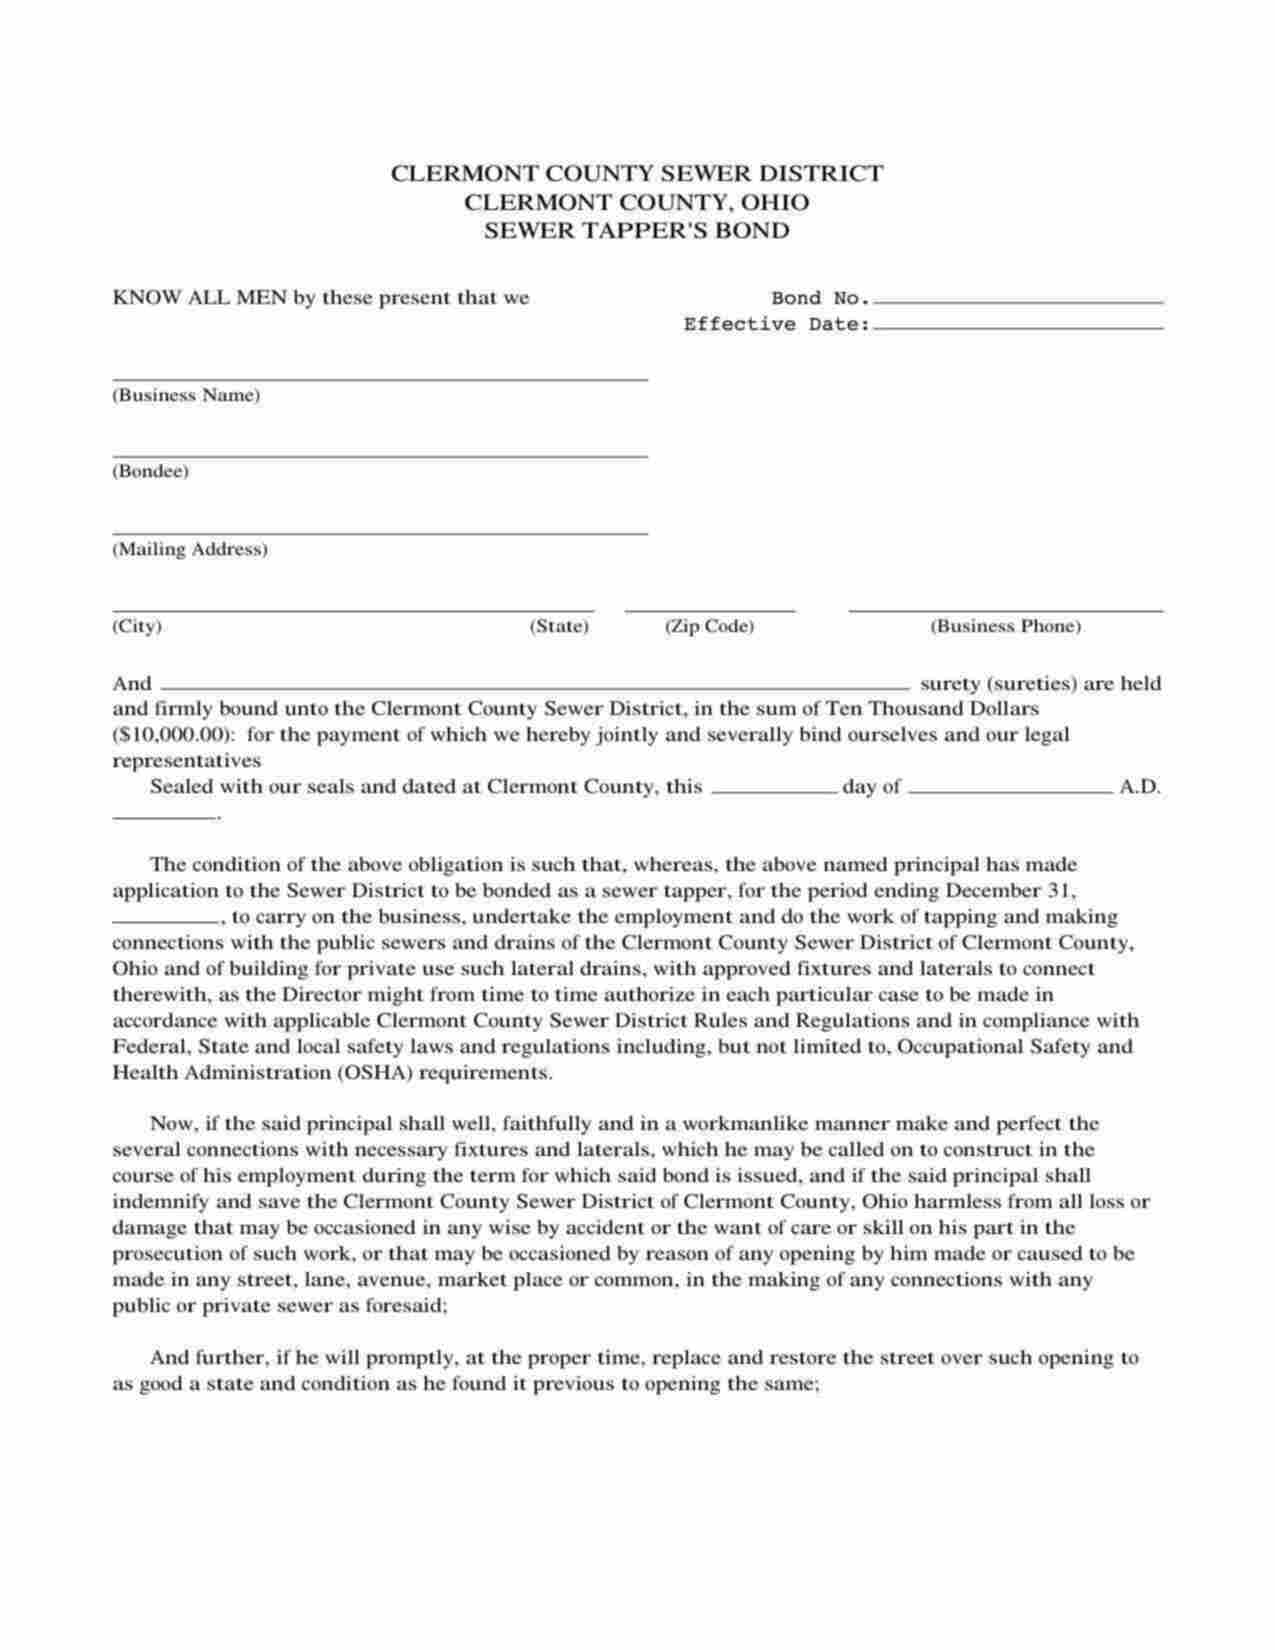 Ohio Sewer Tapper (Sewer District) Bond Form